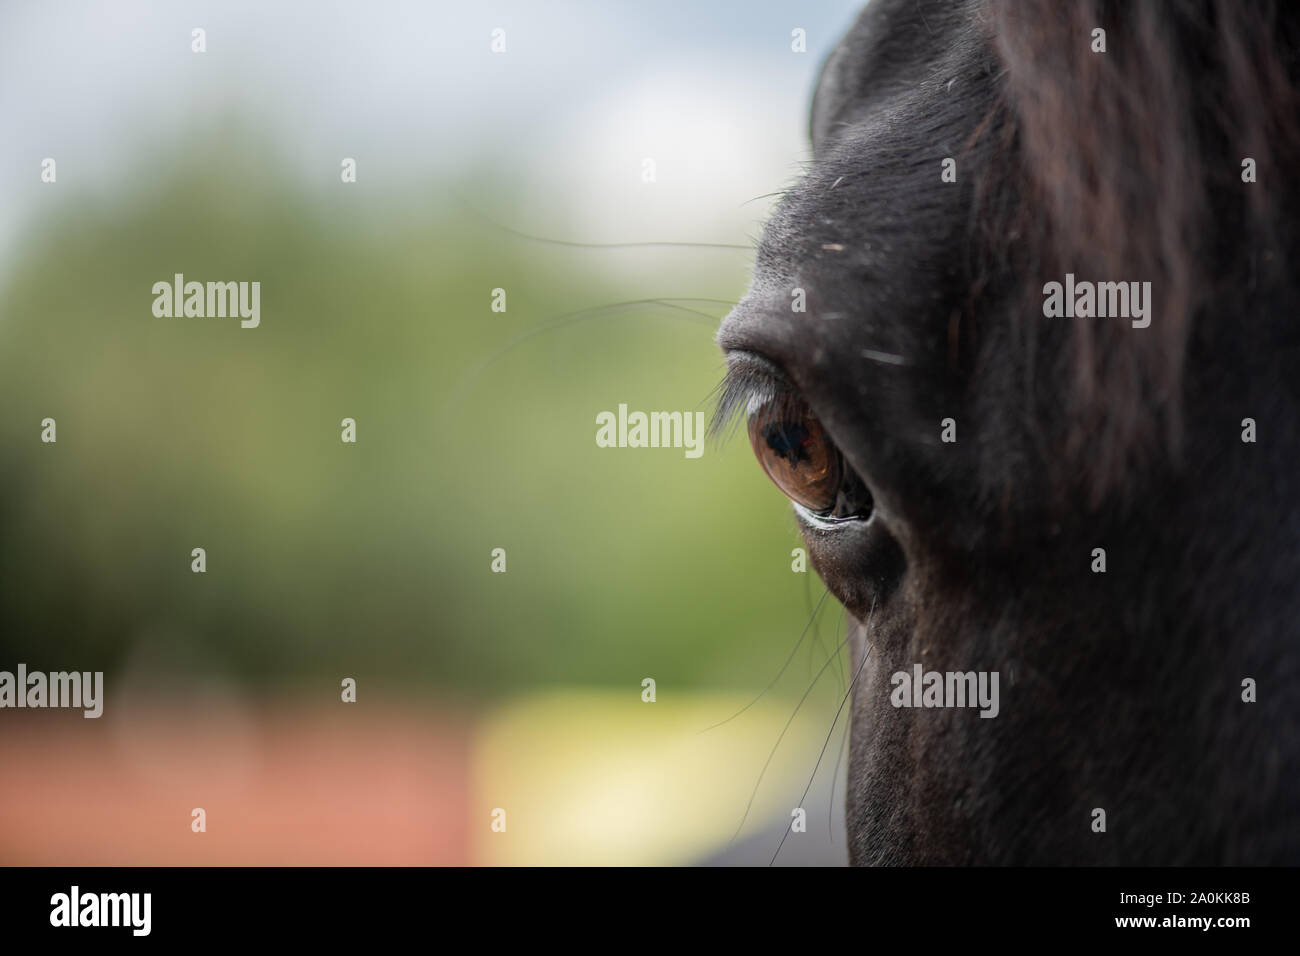 Right brown eye with eyelashes of young black purebred racehorse Stock Photo